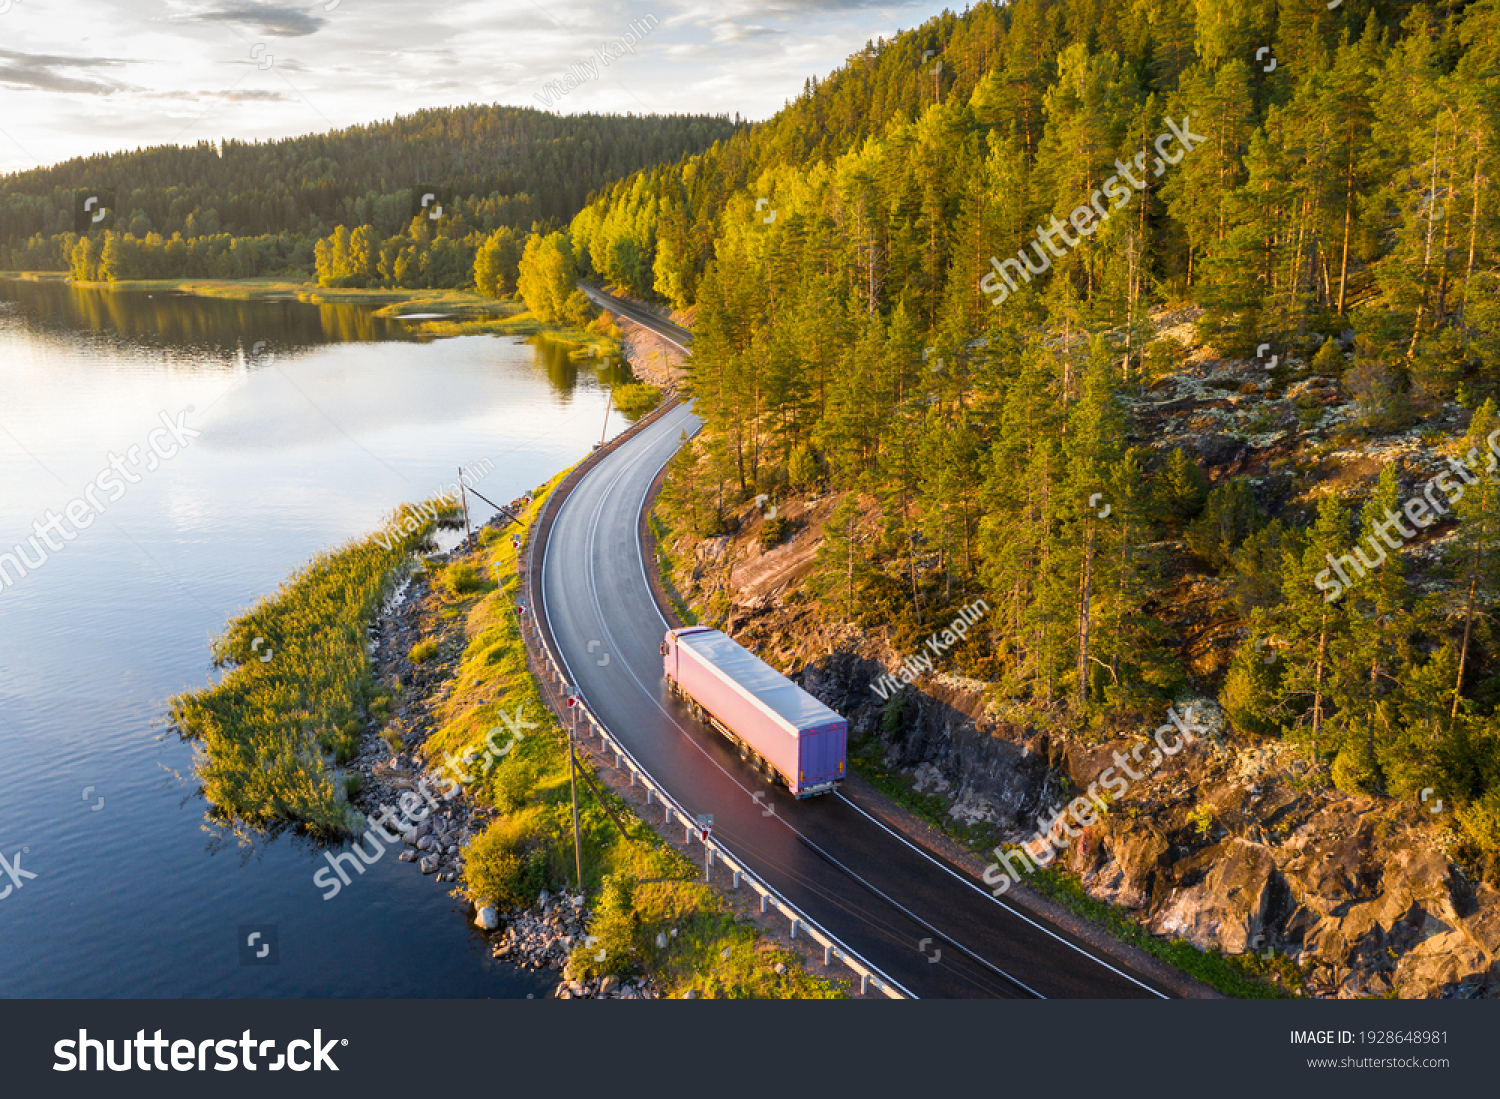 Aerial view of semi truck with cargo trailer on road curve at lake shore with green pine forest. Transportation background. Beautiful nature landscape at sunset in Republic of Karelia, Russia #1928648981